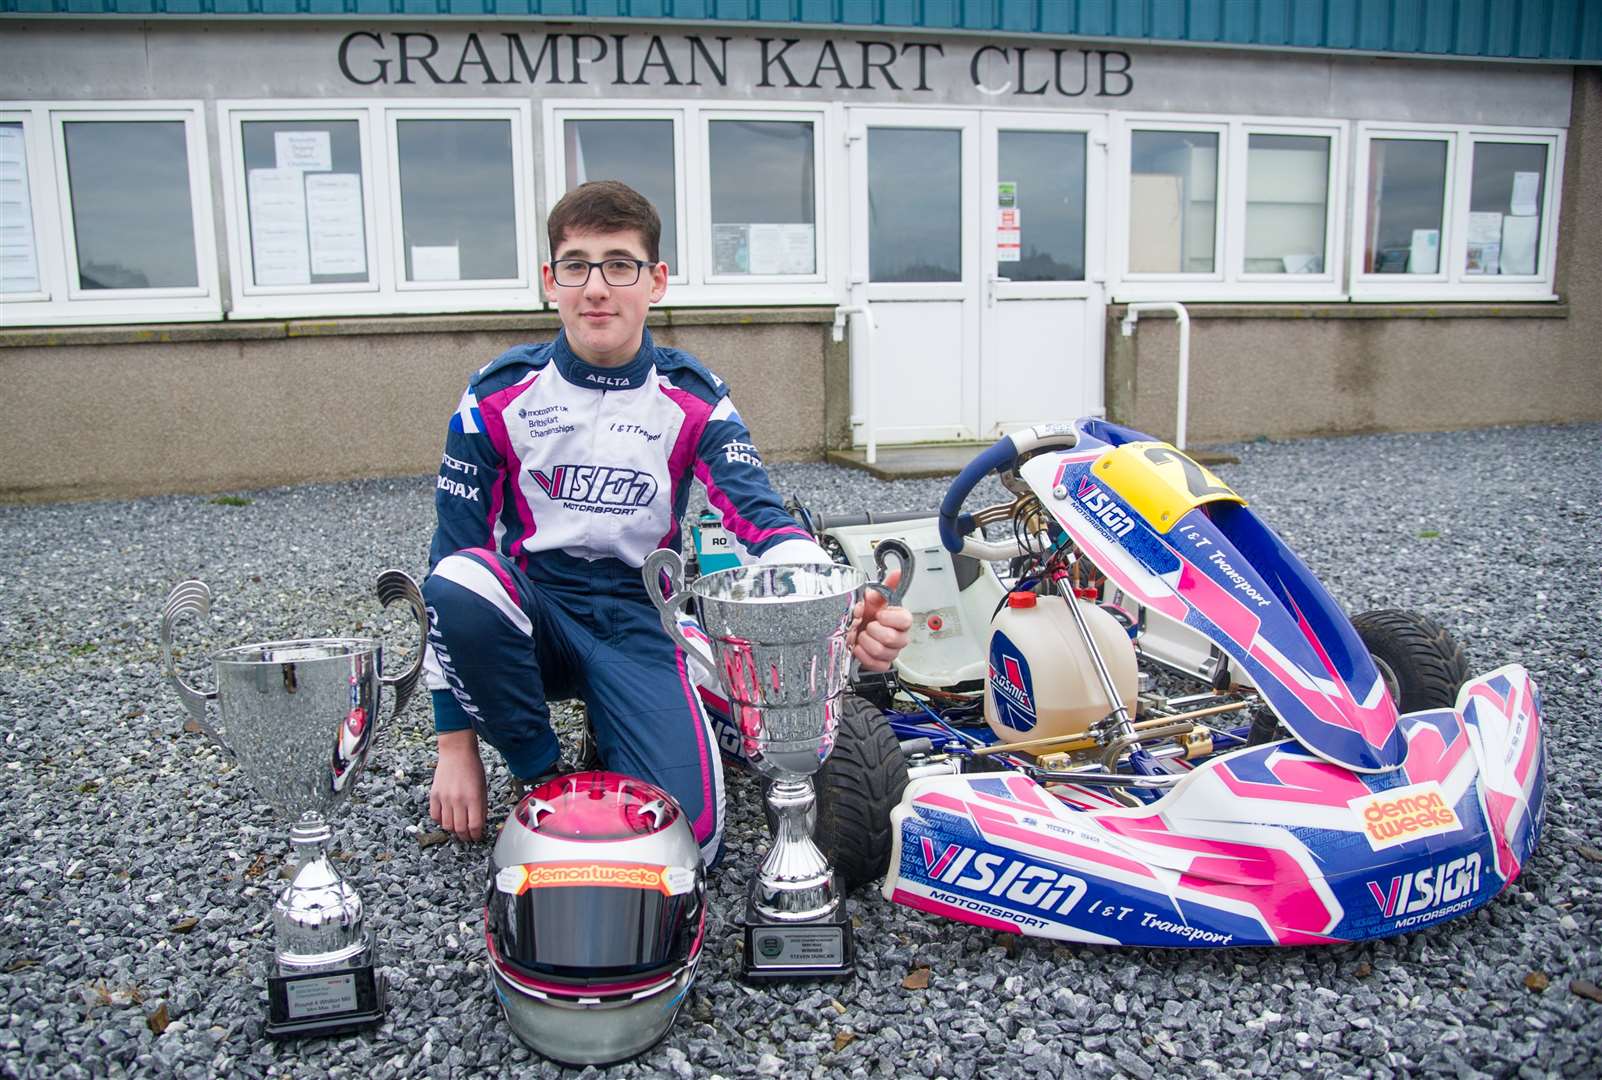 Steven Duncan has become British karting vice-champion and is set to compete in the world finals in Portugal...Picture: Becky Saunderson